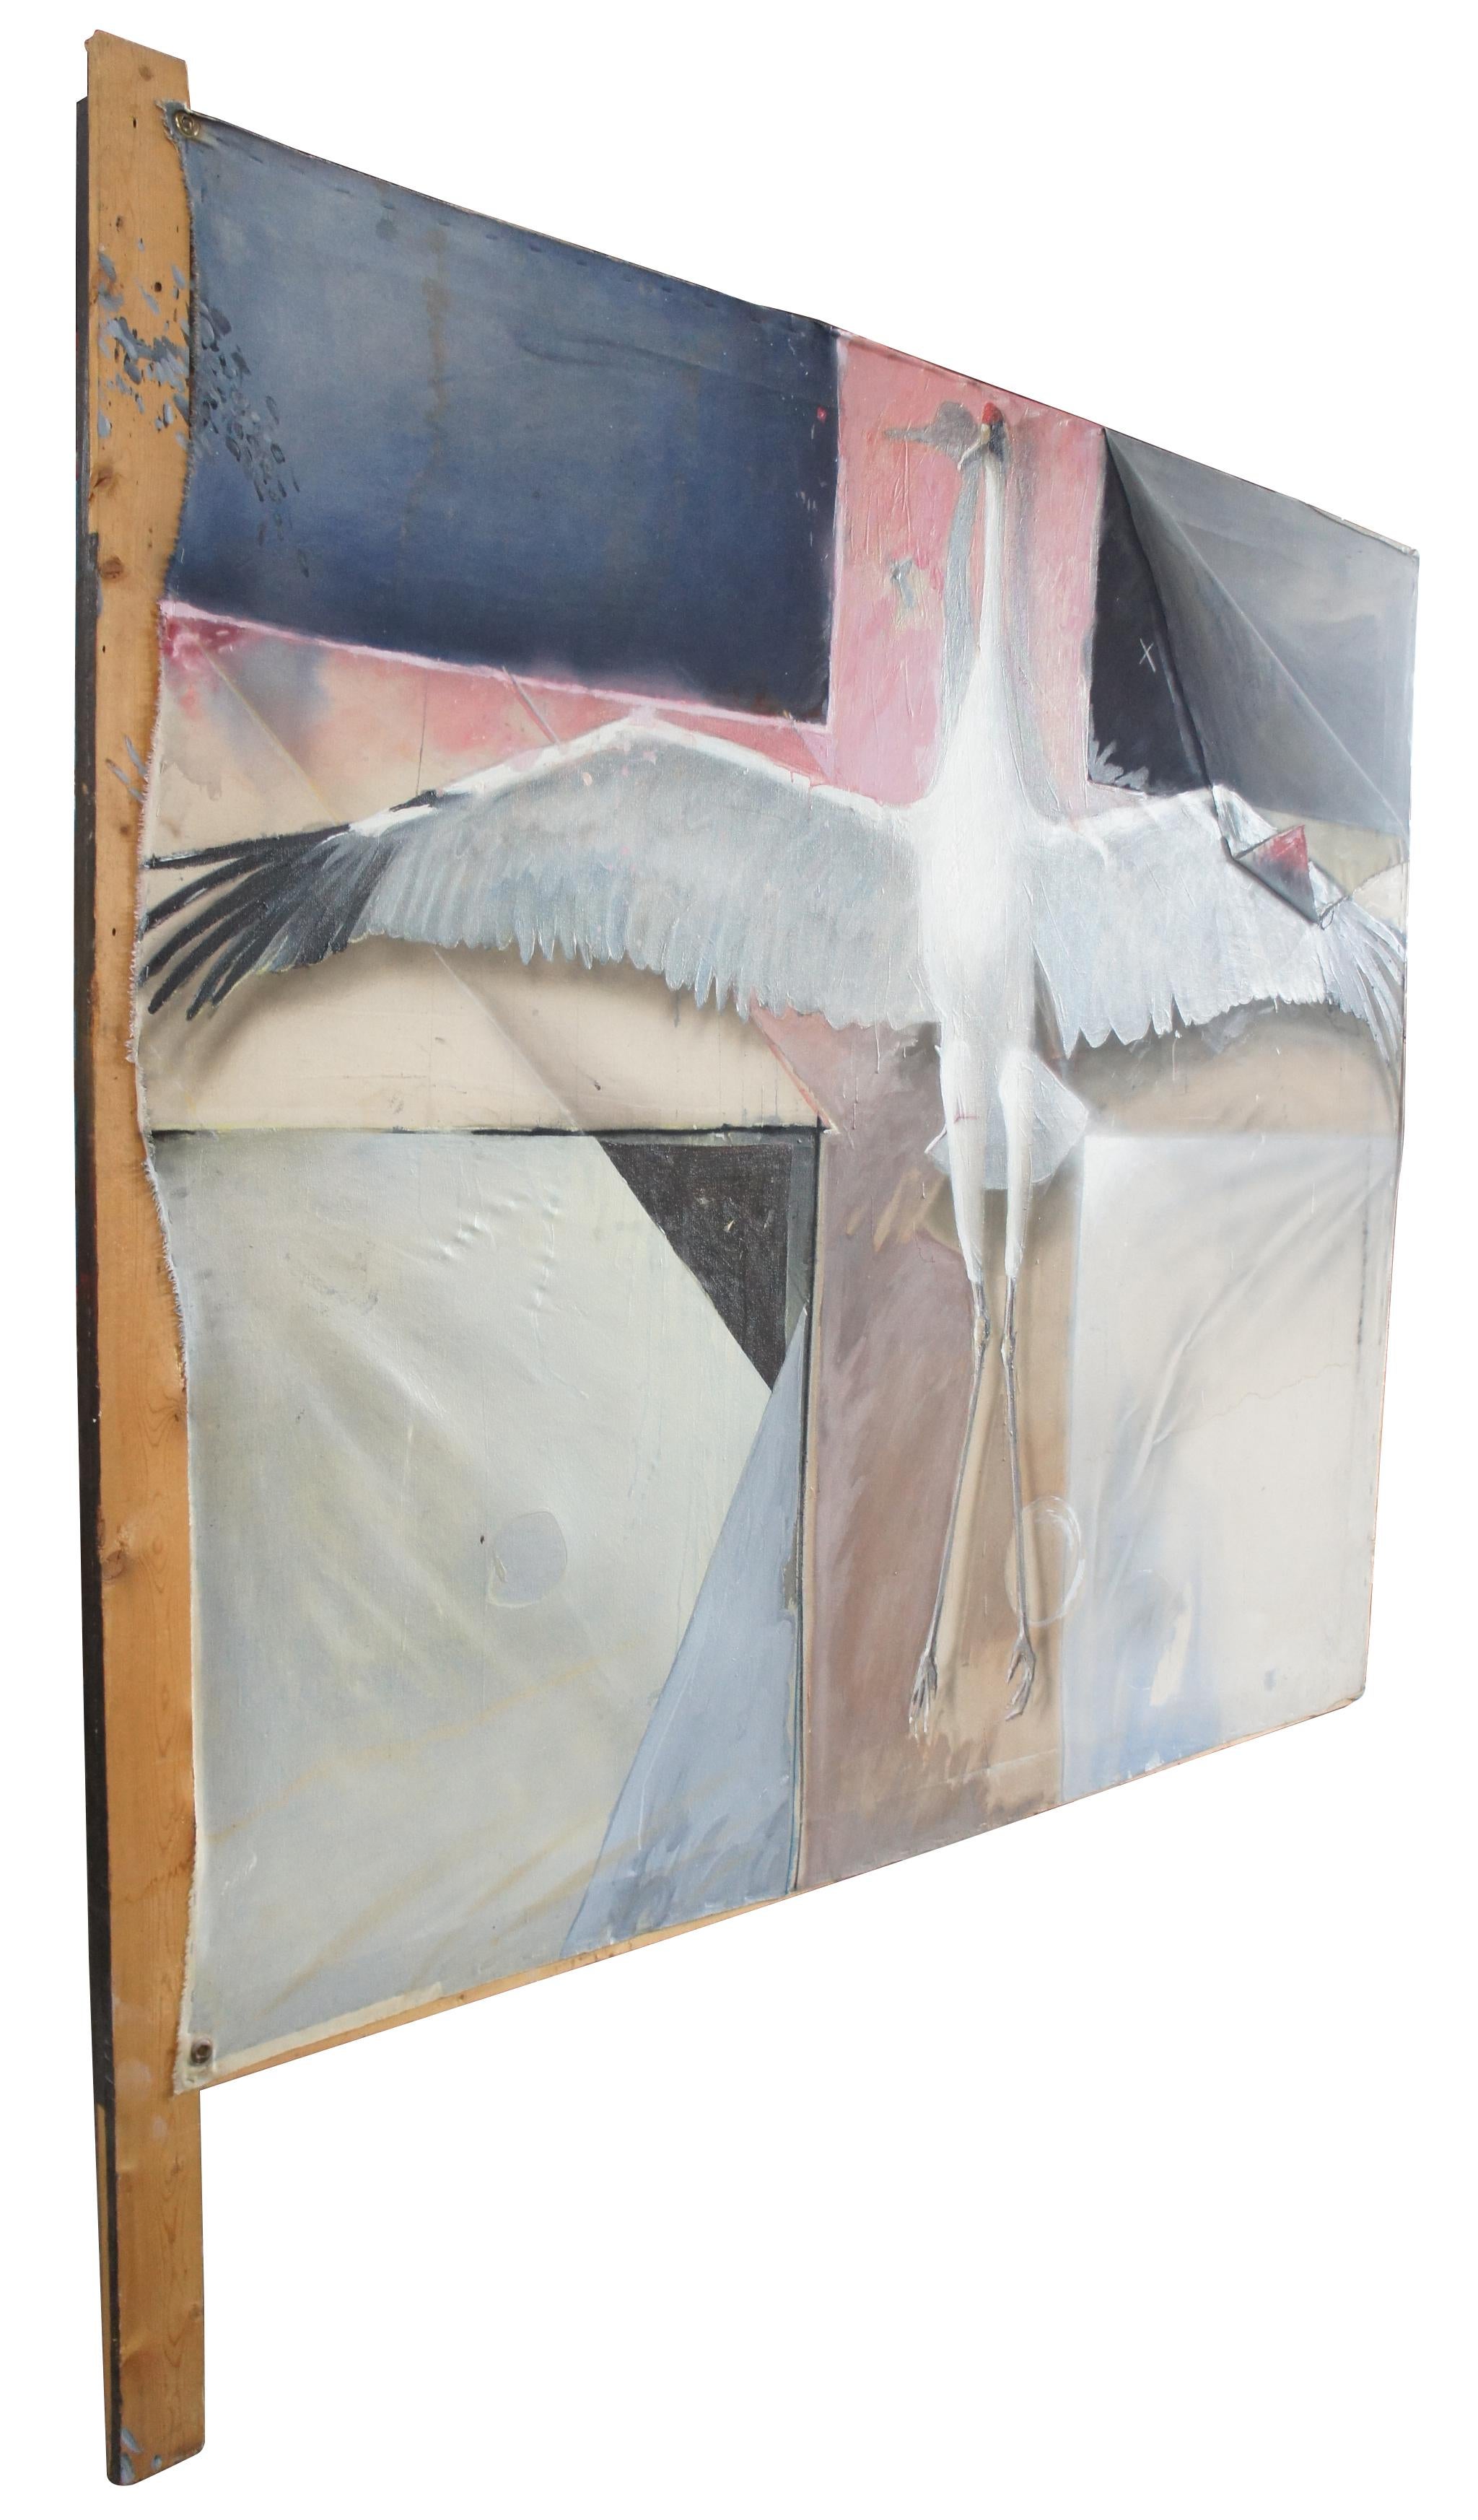 Greg Glazier mixed-media oil on canvas painting crucified Sandhill crane stork

Greg A Glazier is an active artist in Salt Lake City, Utah.